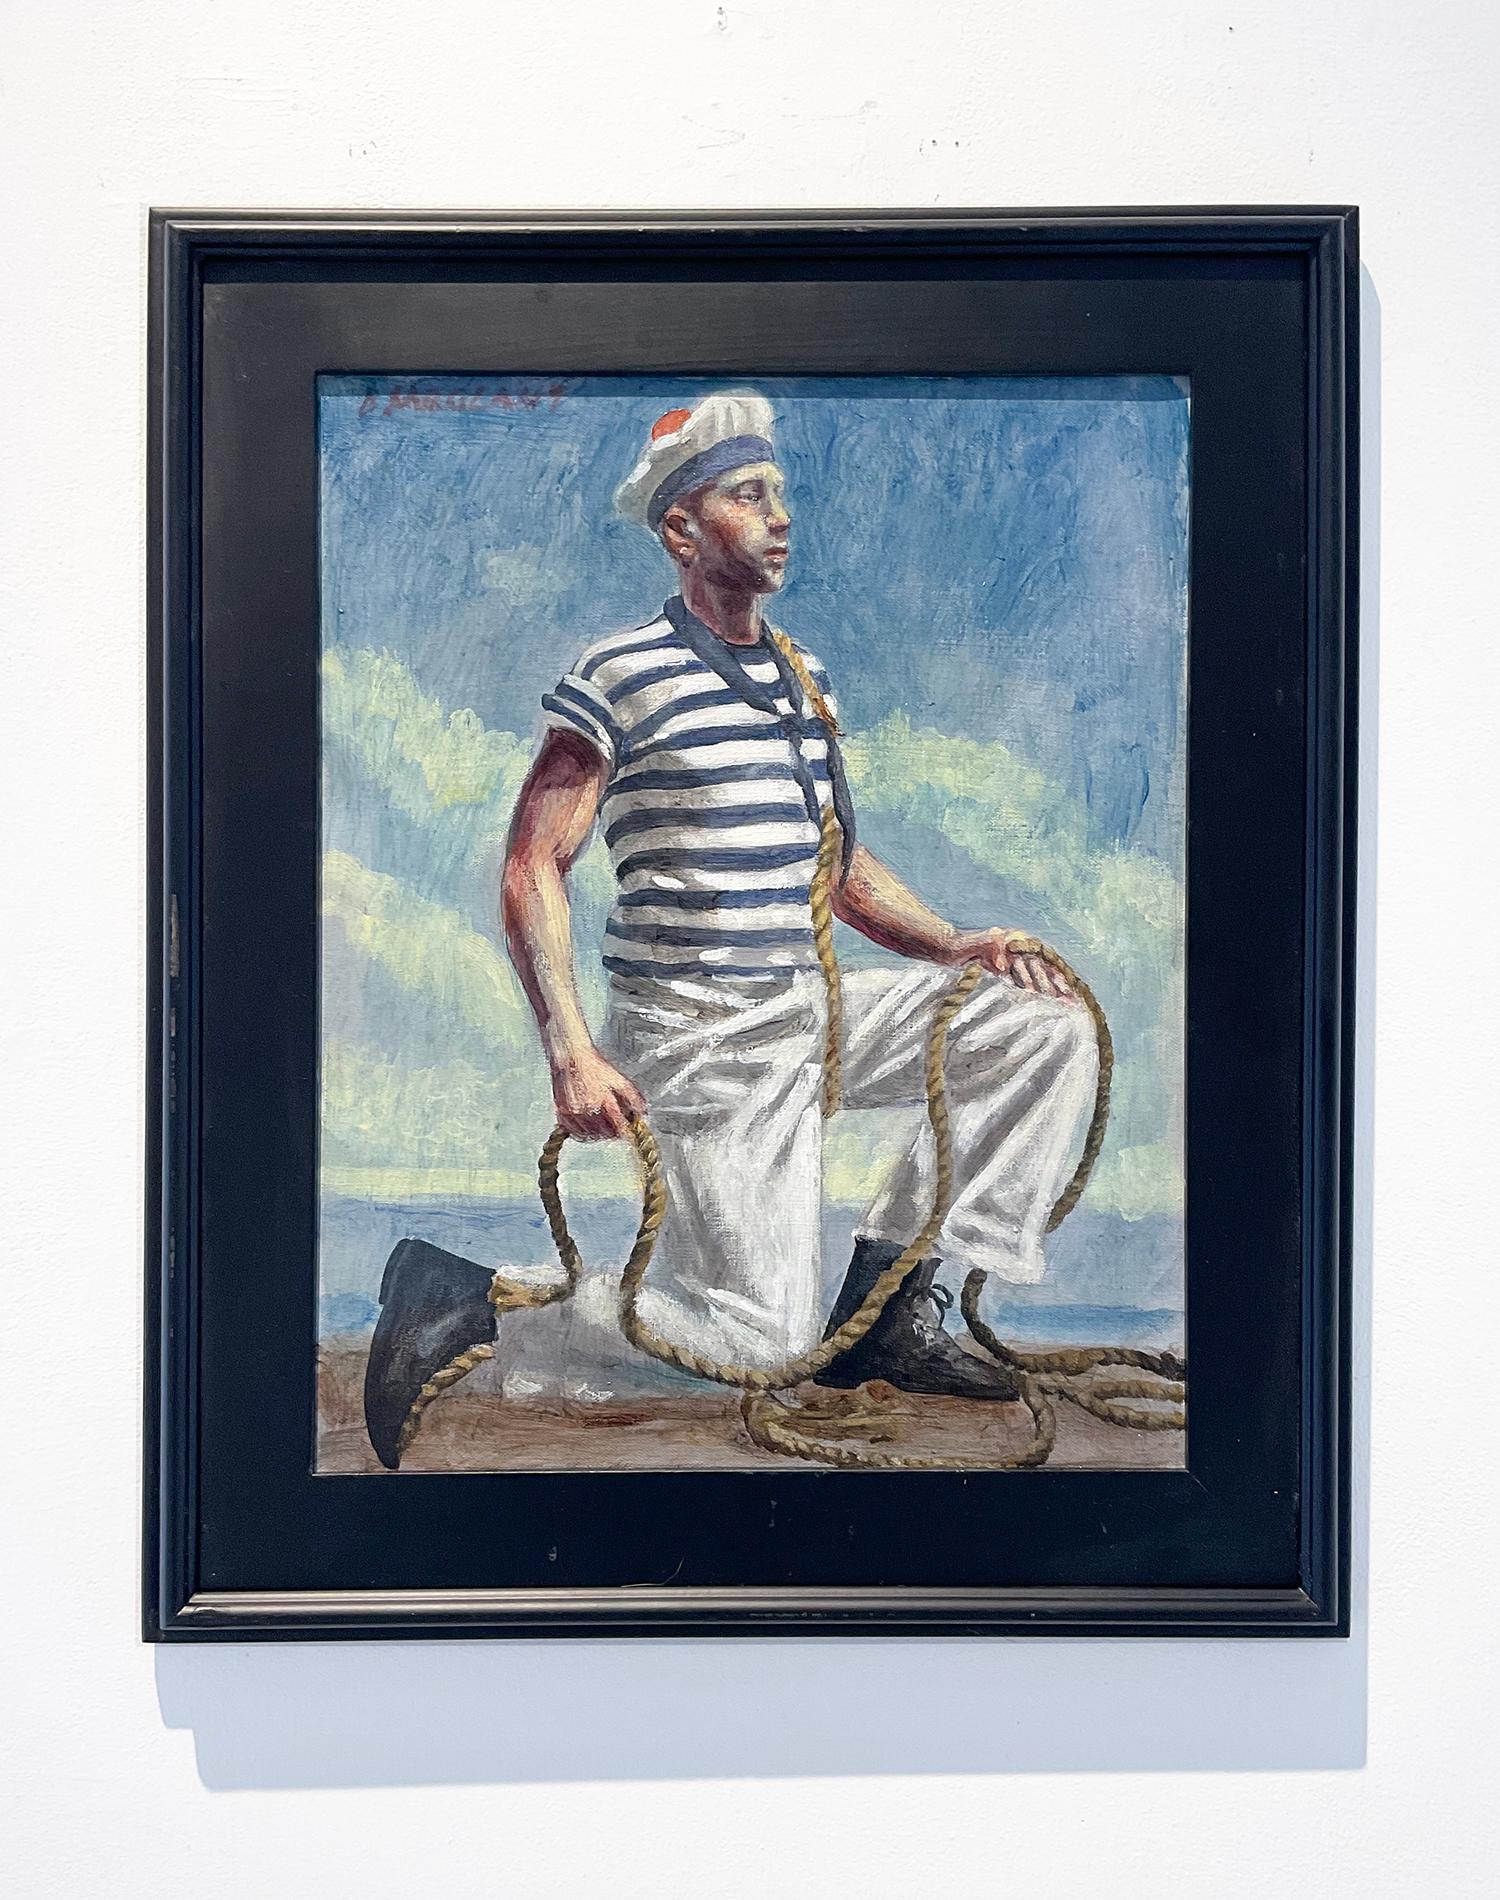 Academic, nautical style figurative oil painting of a handsome sailor against an ocean landscape
